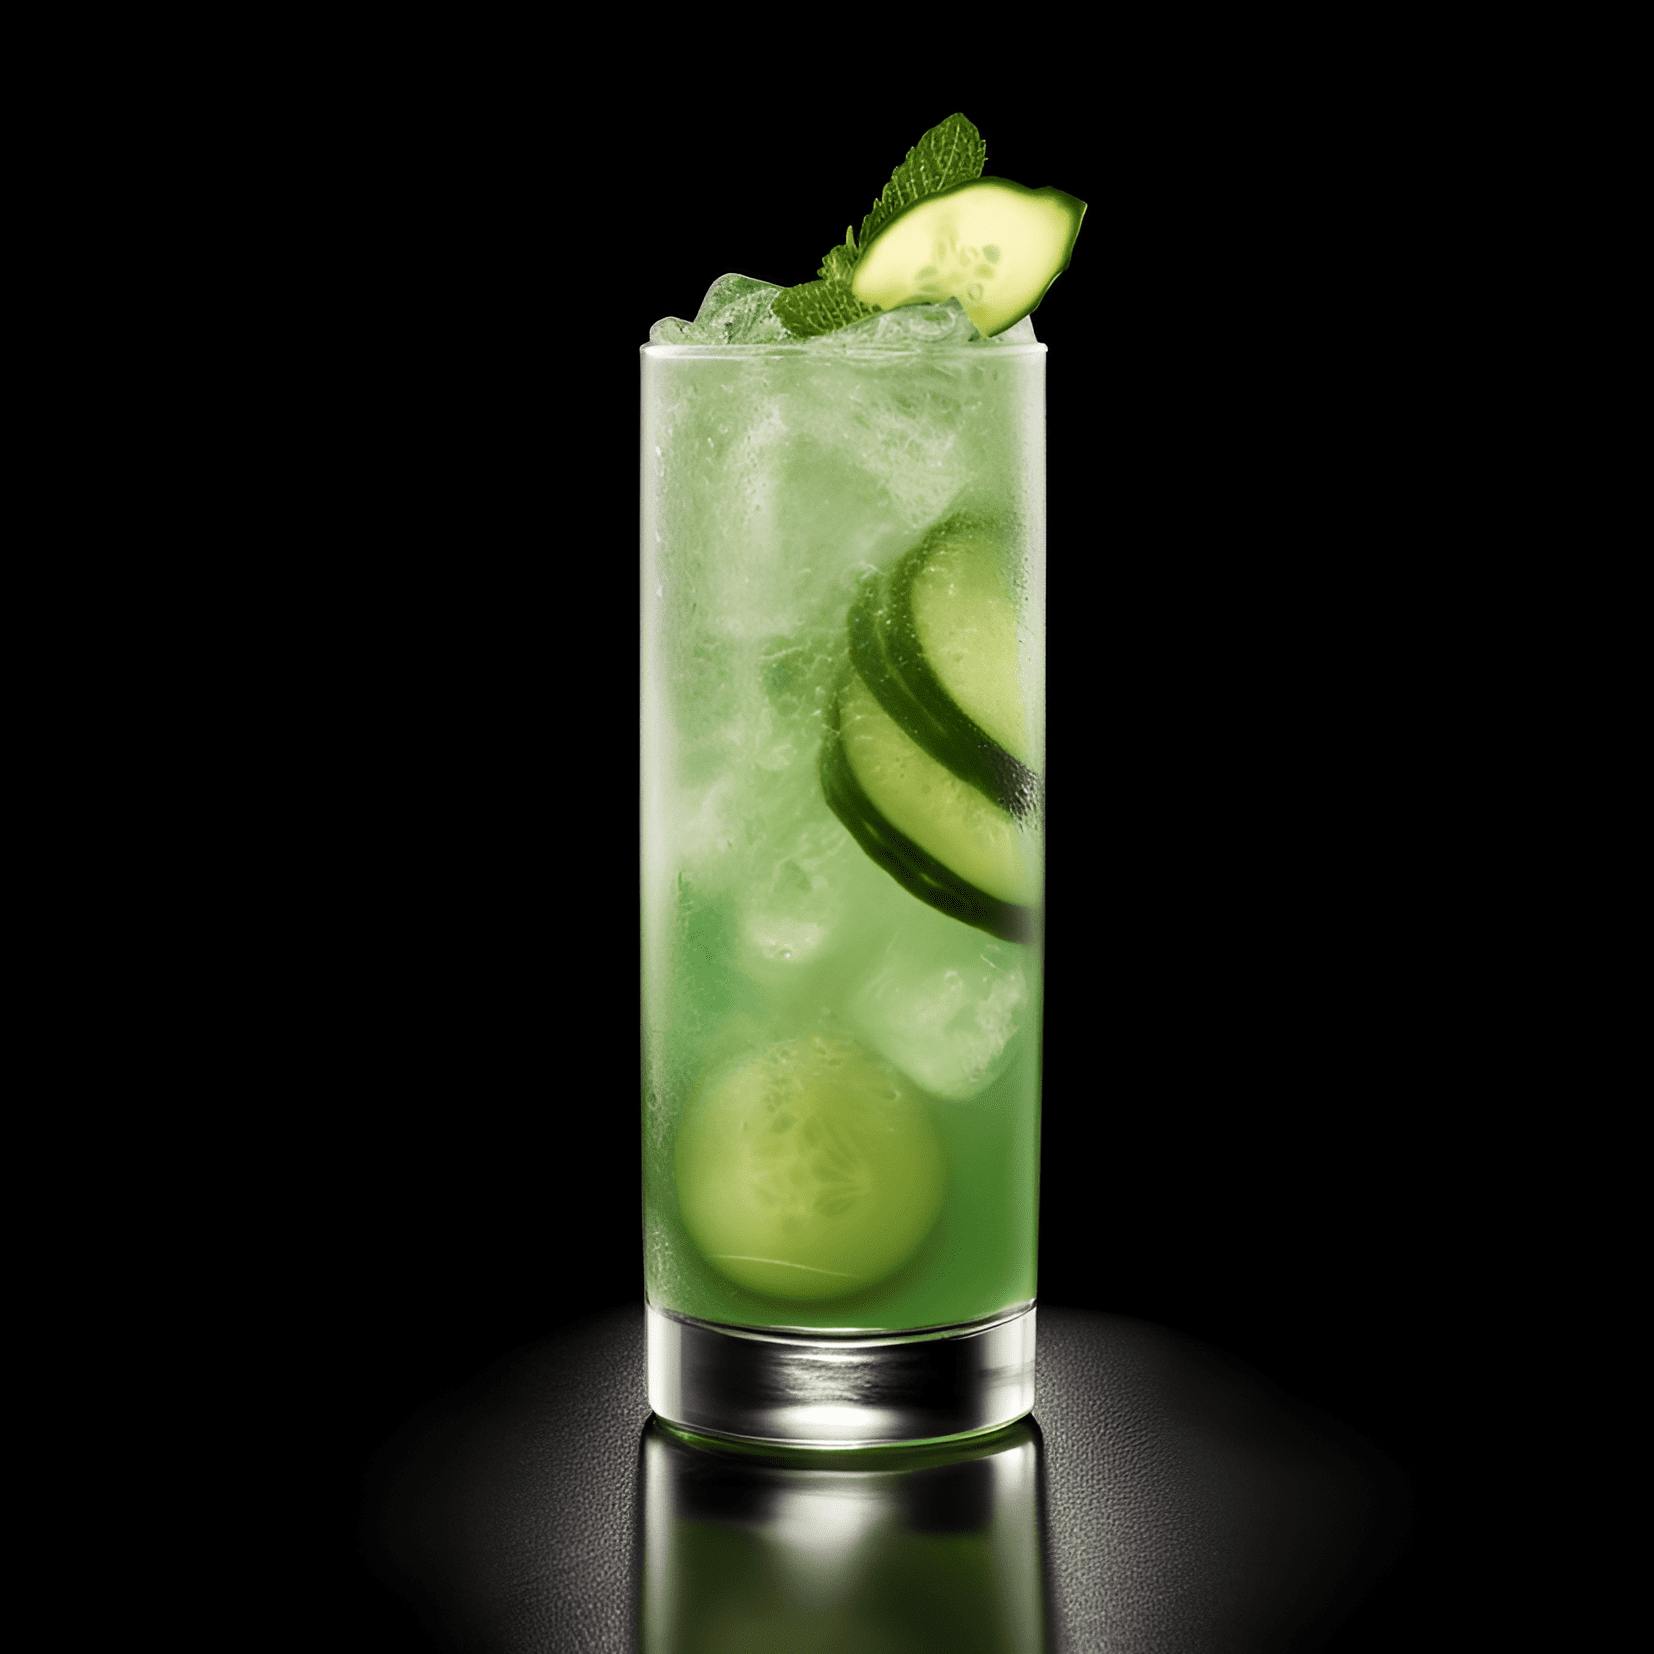 Cucumber Cooler Cocktail Recipe - The Cucumber Cooler is a crisp, refreshing, and slightly sweet cocktail with a hint of tartness from the lime juice. It has a light, clean taste with a subtle cucumber flavor.